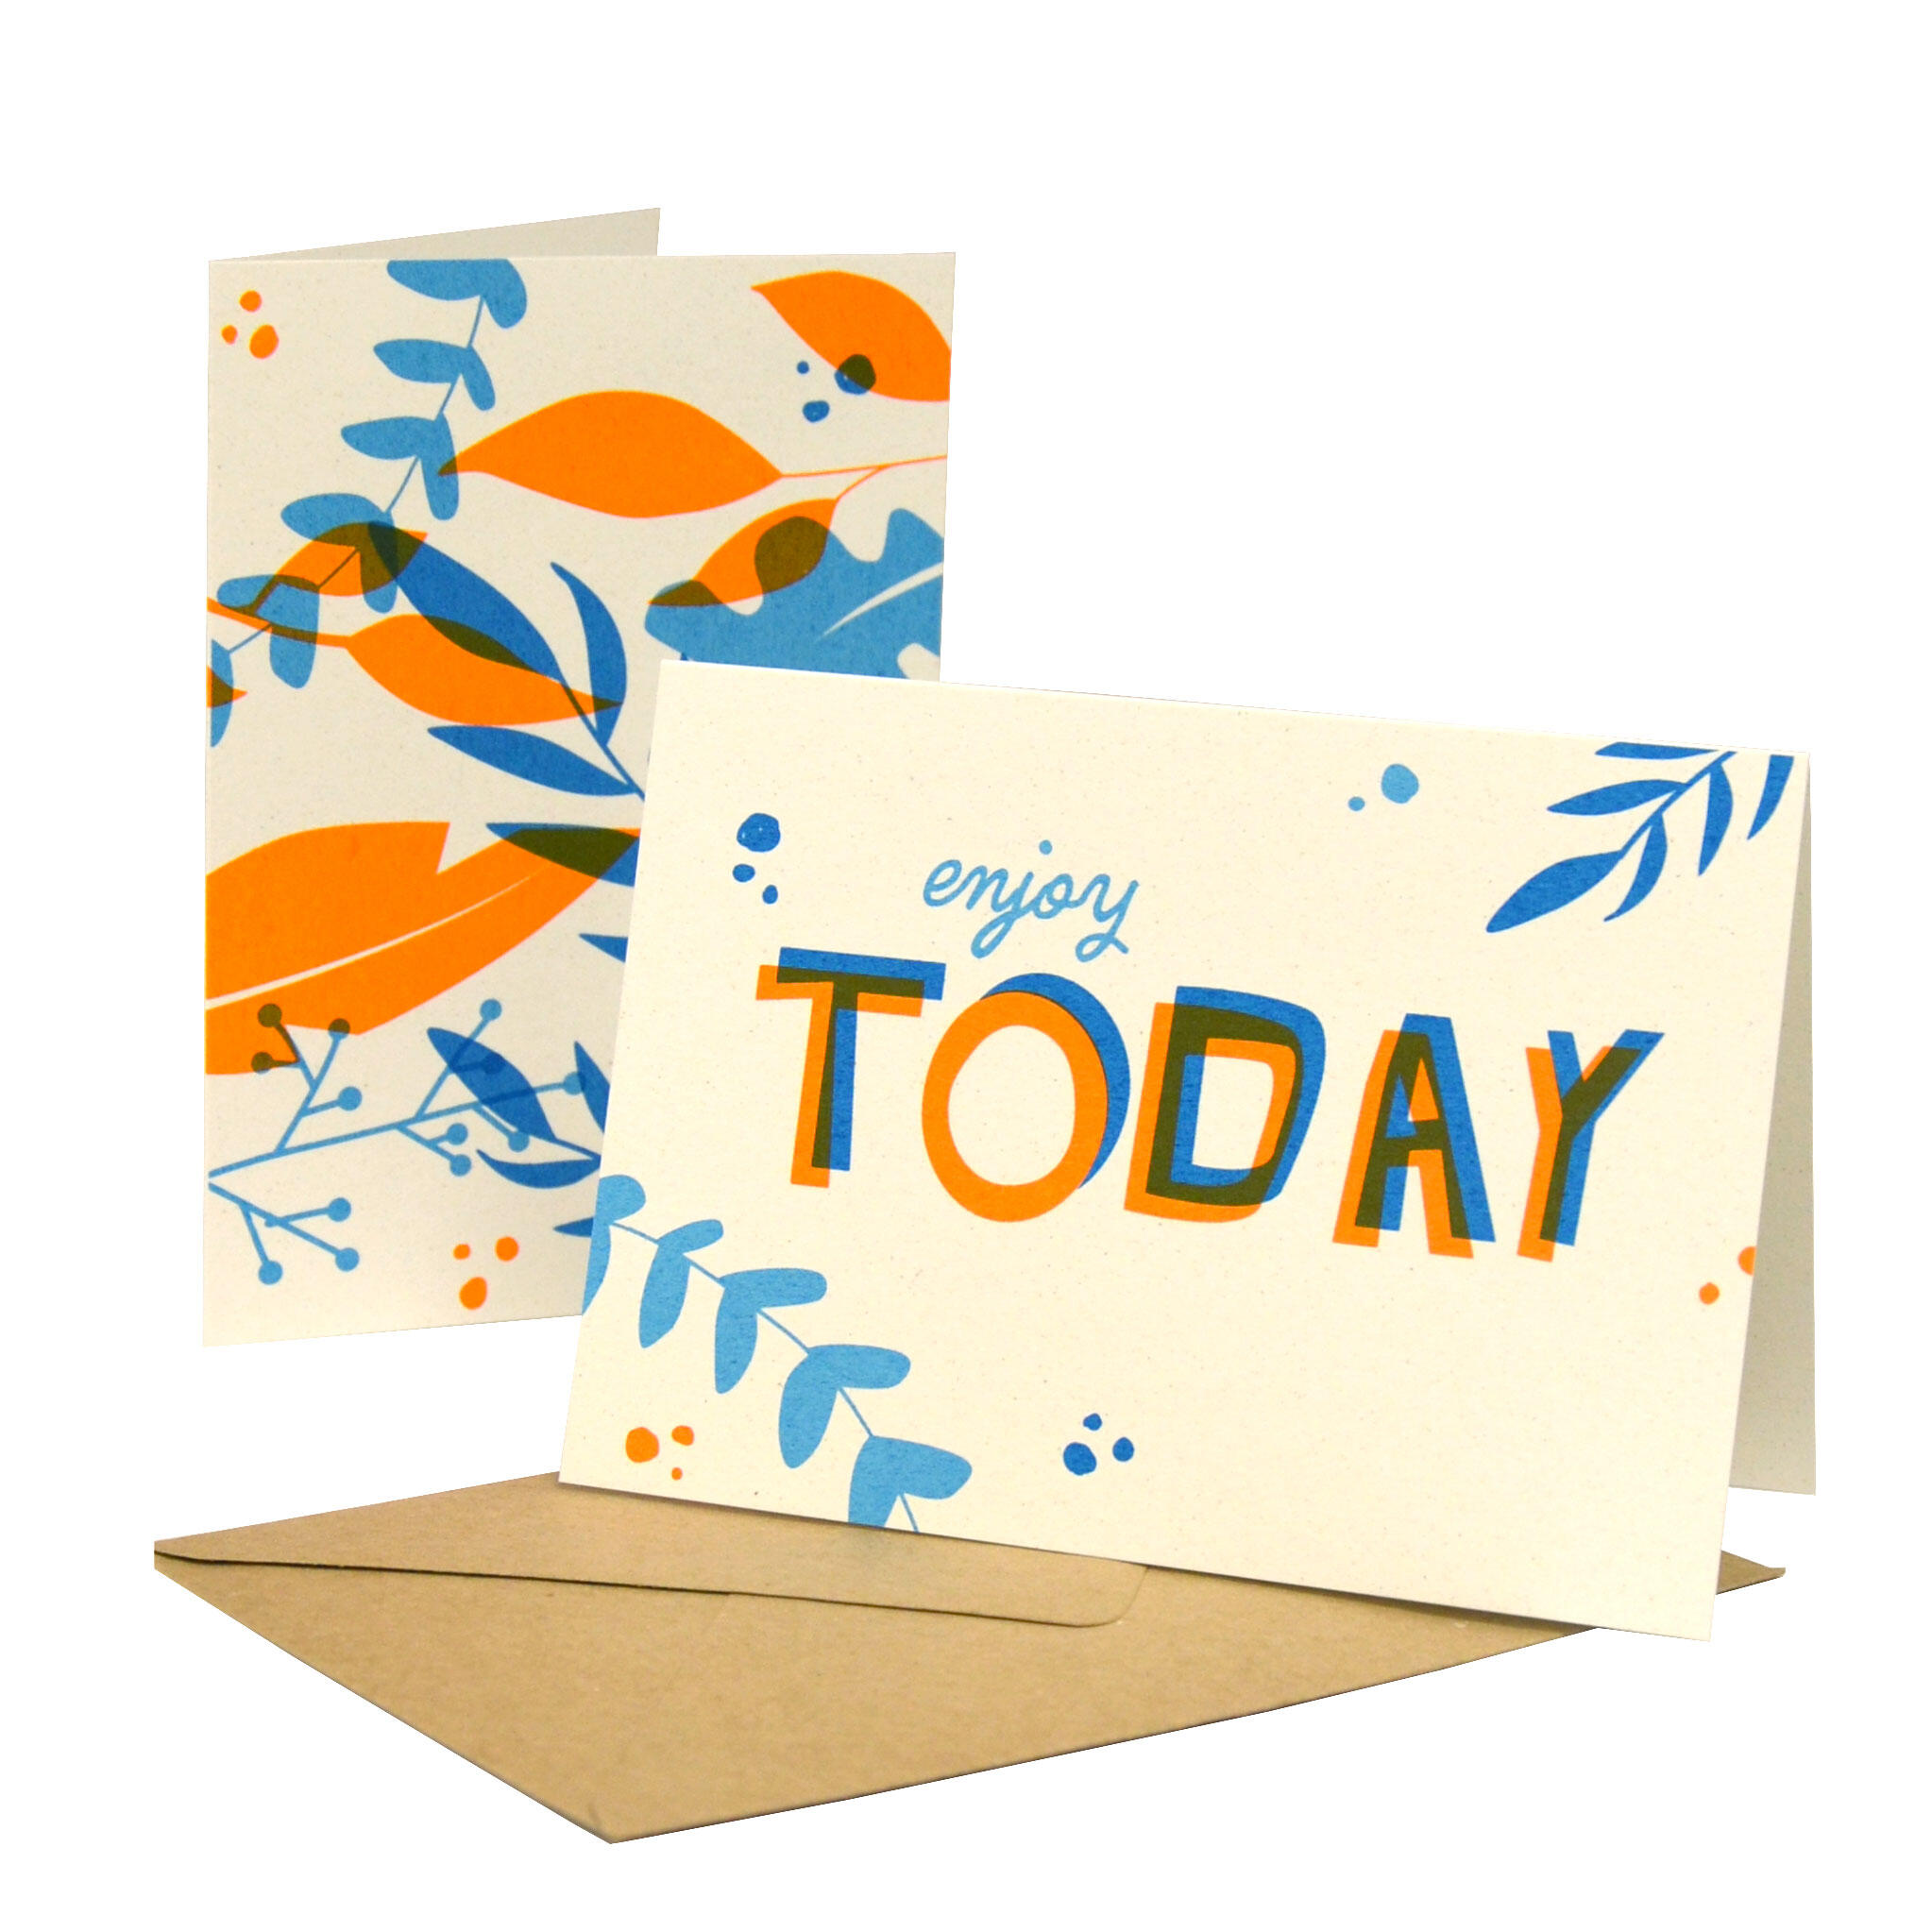 Set of 2 double greating cards “Enjoy Today”